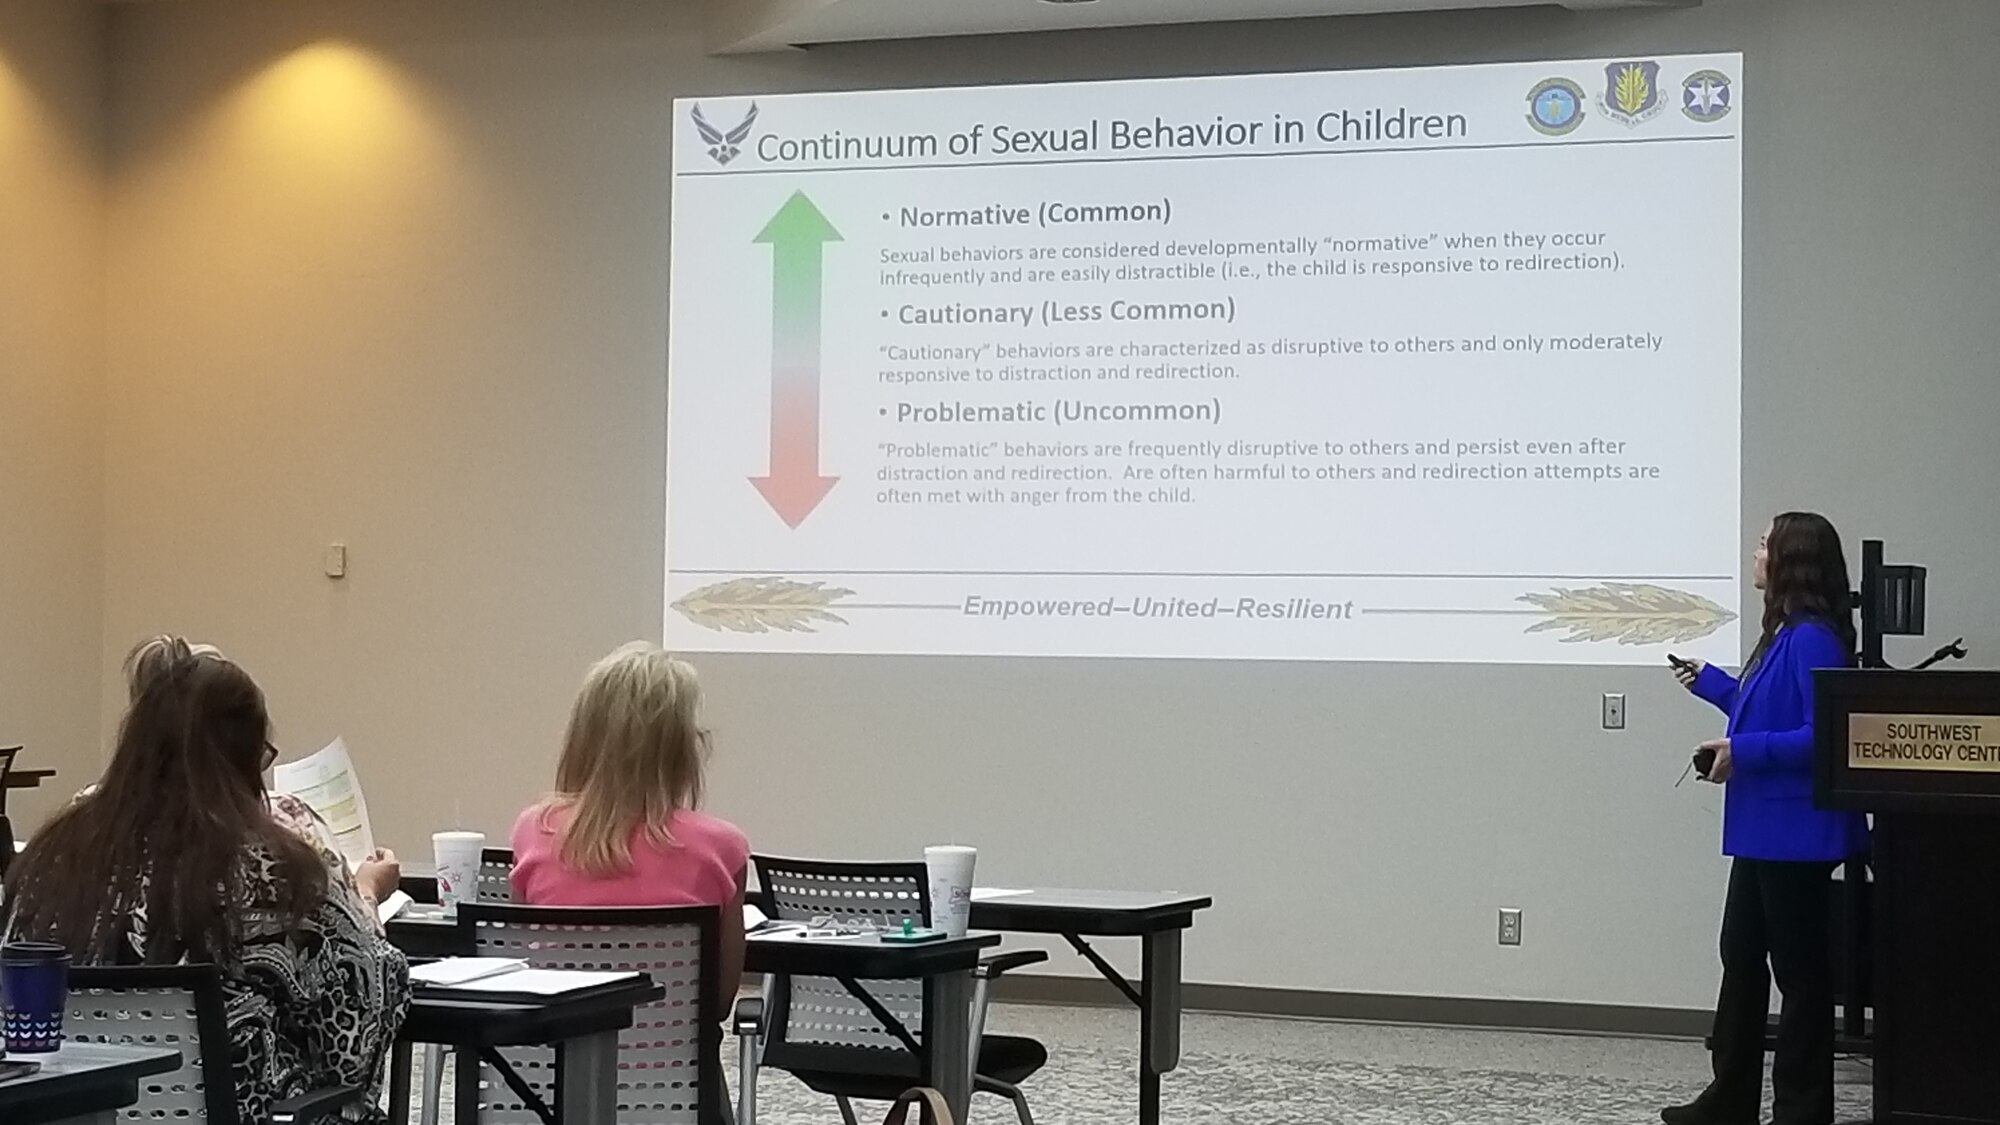 Educators listen to the uncommon and common continuum of problematic sexual behavior in children at a training shared by Sunnye Cope, a 97th Operational Medical Readiness Squadron family advocacy intervention specialist at Southwest Technology Center in Altus, Oklahoma on July 26, 2021. Cope’s main focus at Altus Air Force Base is the Family Advocacy Program which also provides support services in domestic abuse, child abuse and neglect cases. (Courtesy photo by Judy Mott)